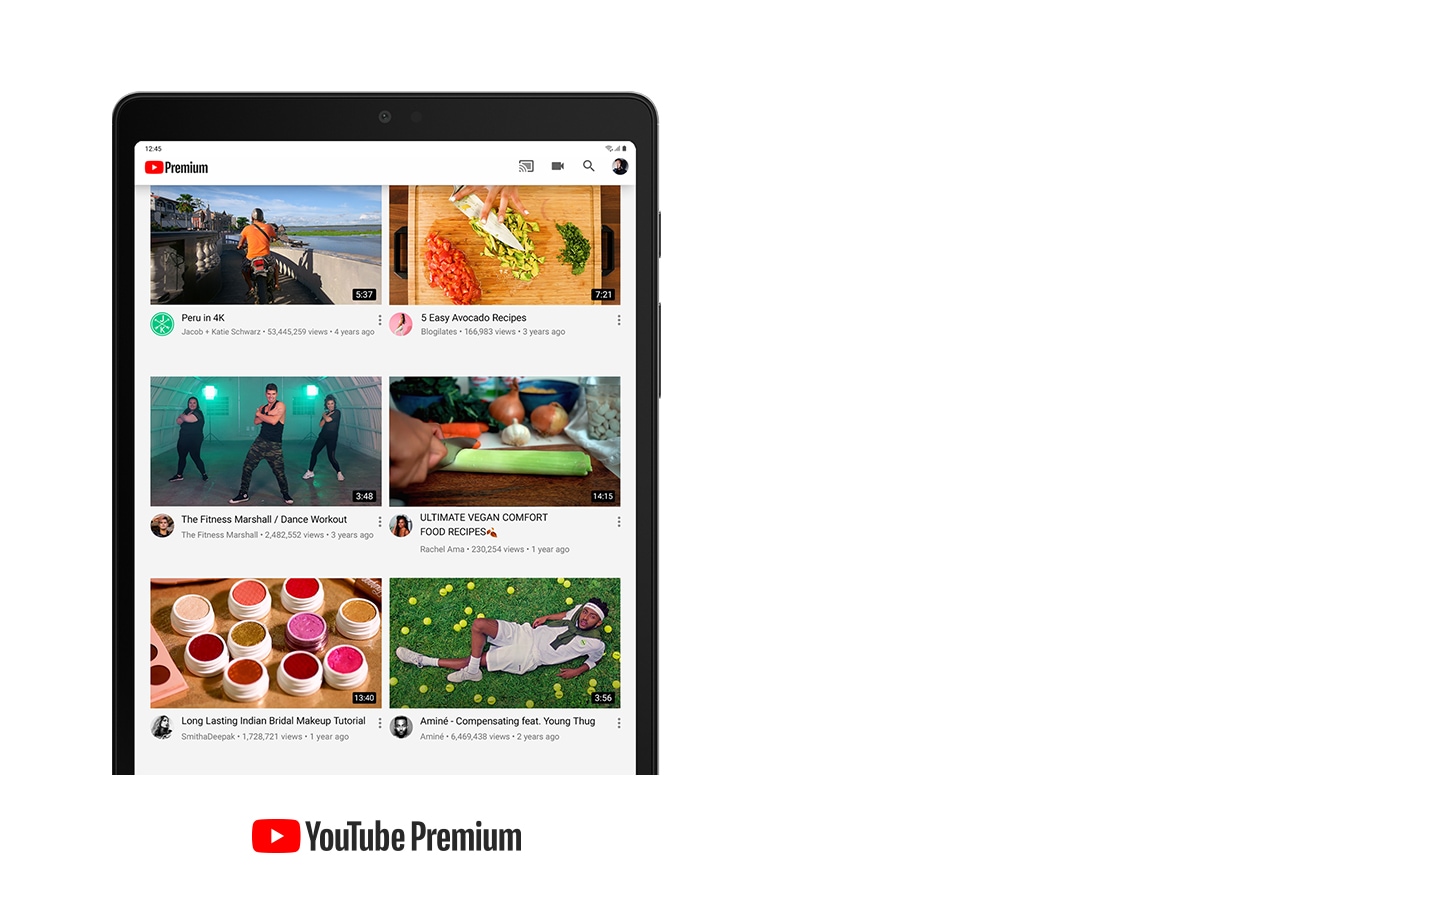 YouTube is displayed on Galaxy Tab A7 Lite showing an assortment of YouTube Premium videos. YouTube Premium logo is displayed.